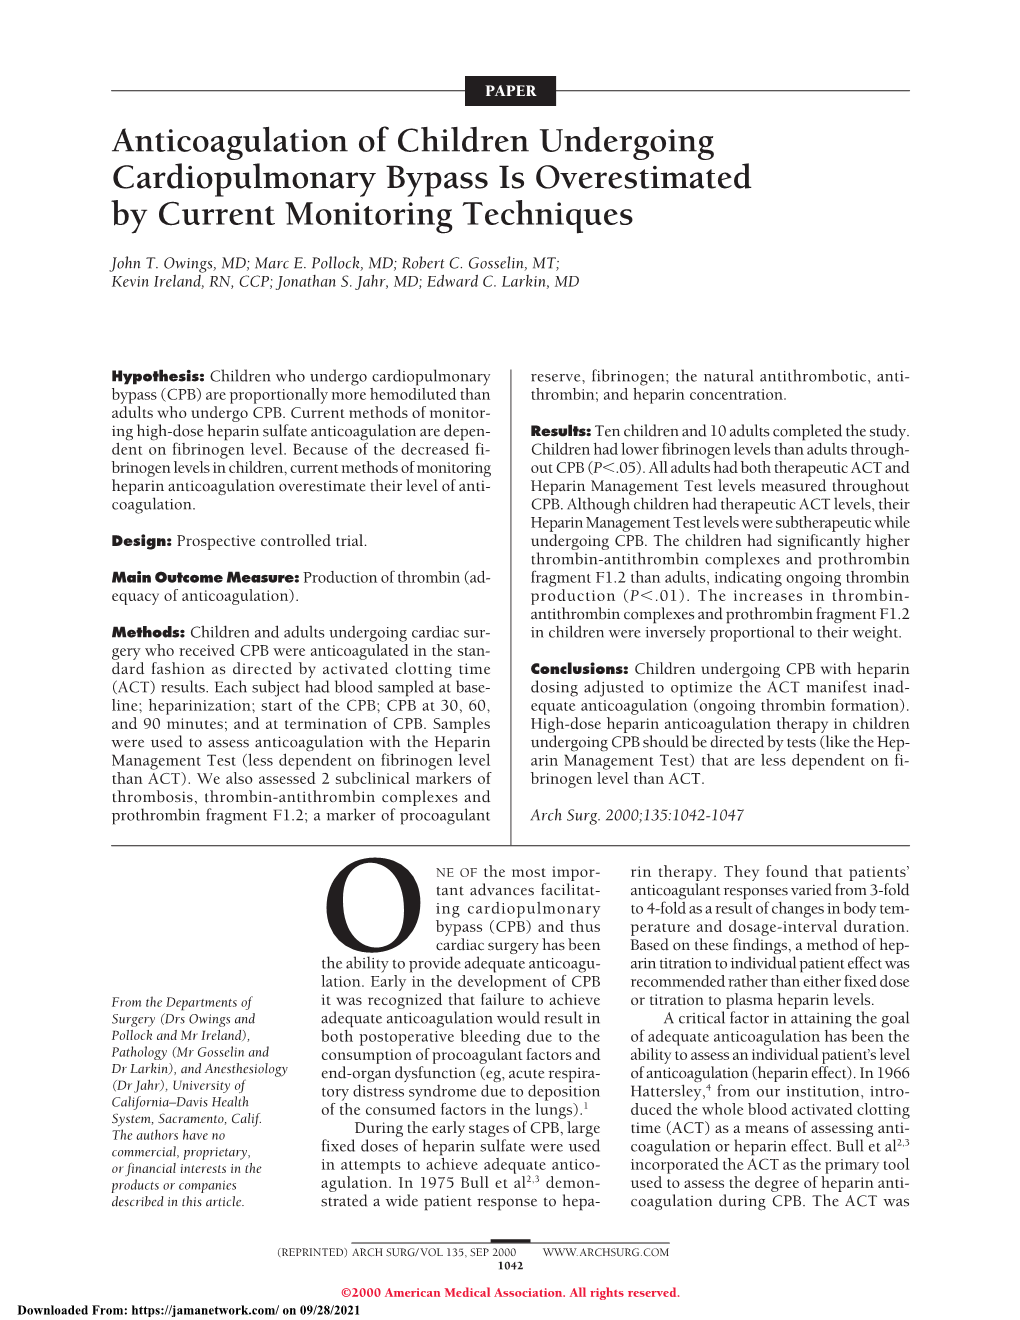 Anticoagulation of Children Undergoing Cardiopulmonary Bypass Is Overestimated by Current Monitoring Techniques